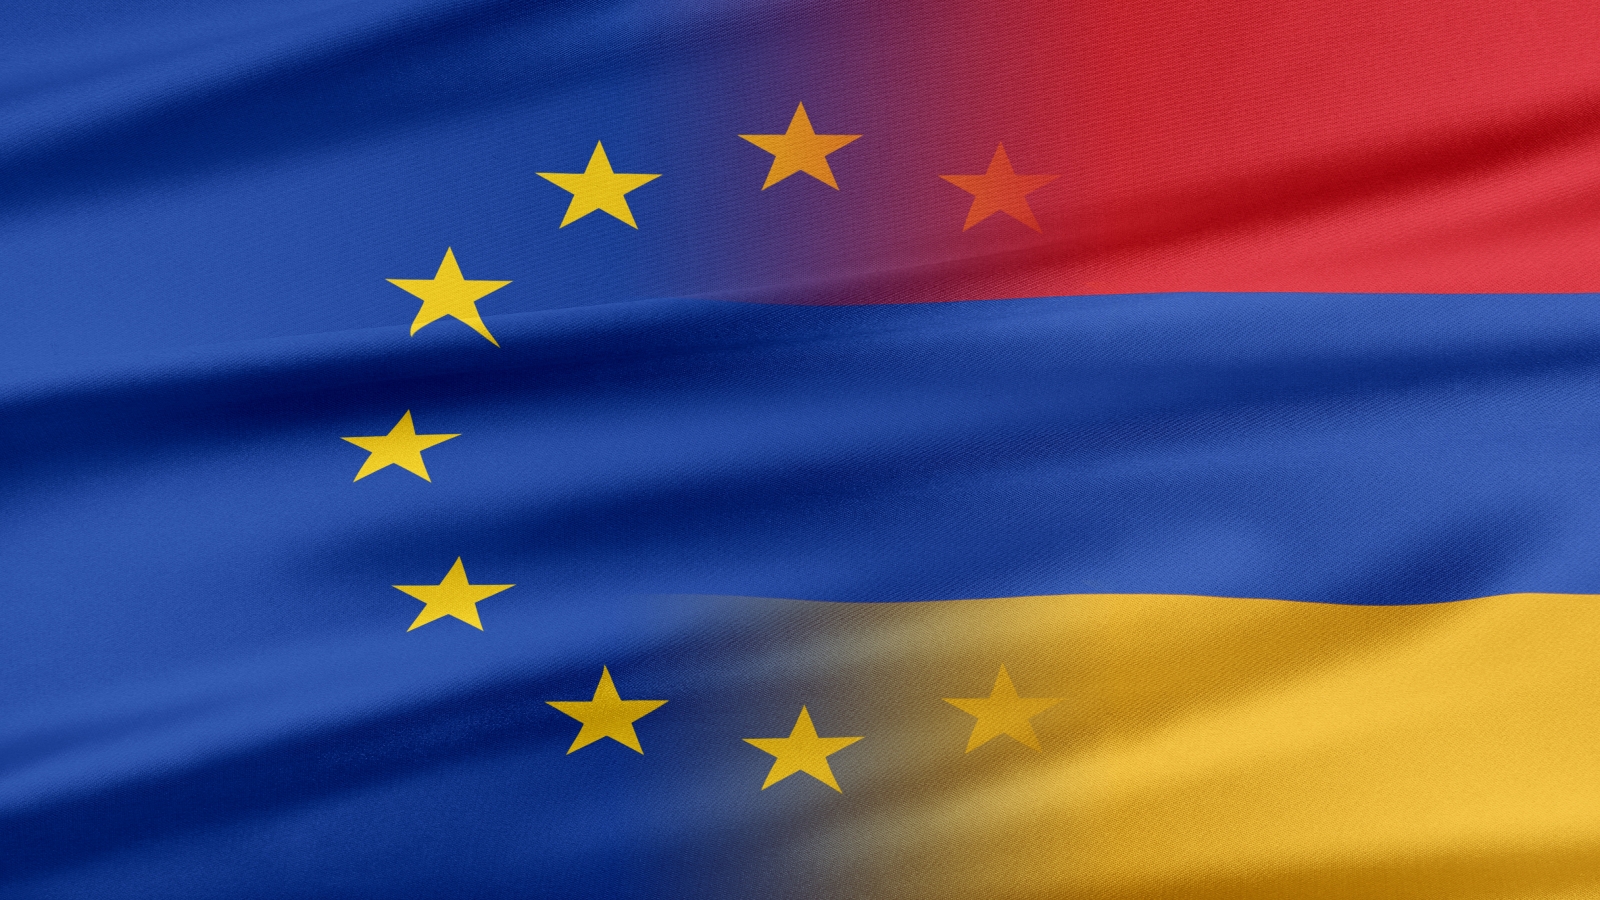 EU and Armenia meet in Yerevan to discuss cooperation in several areas